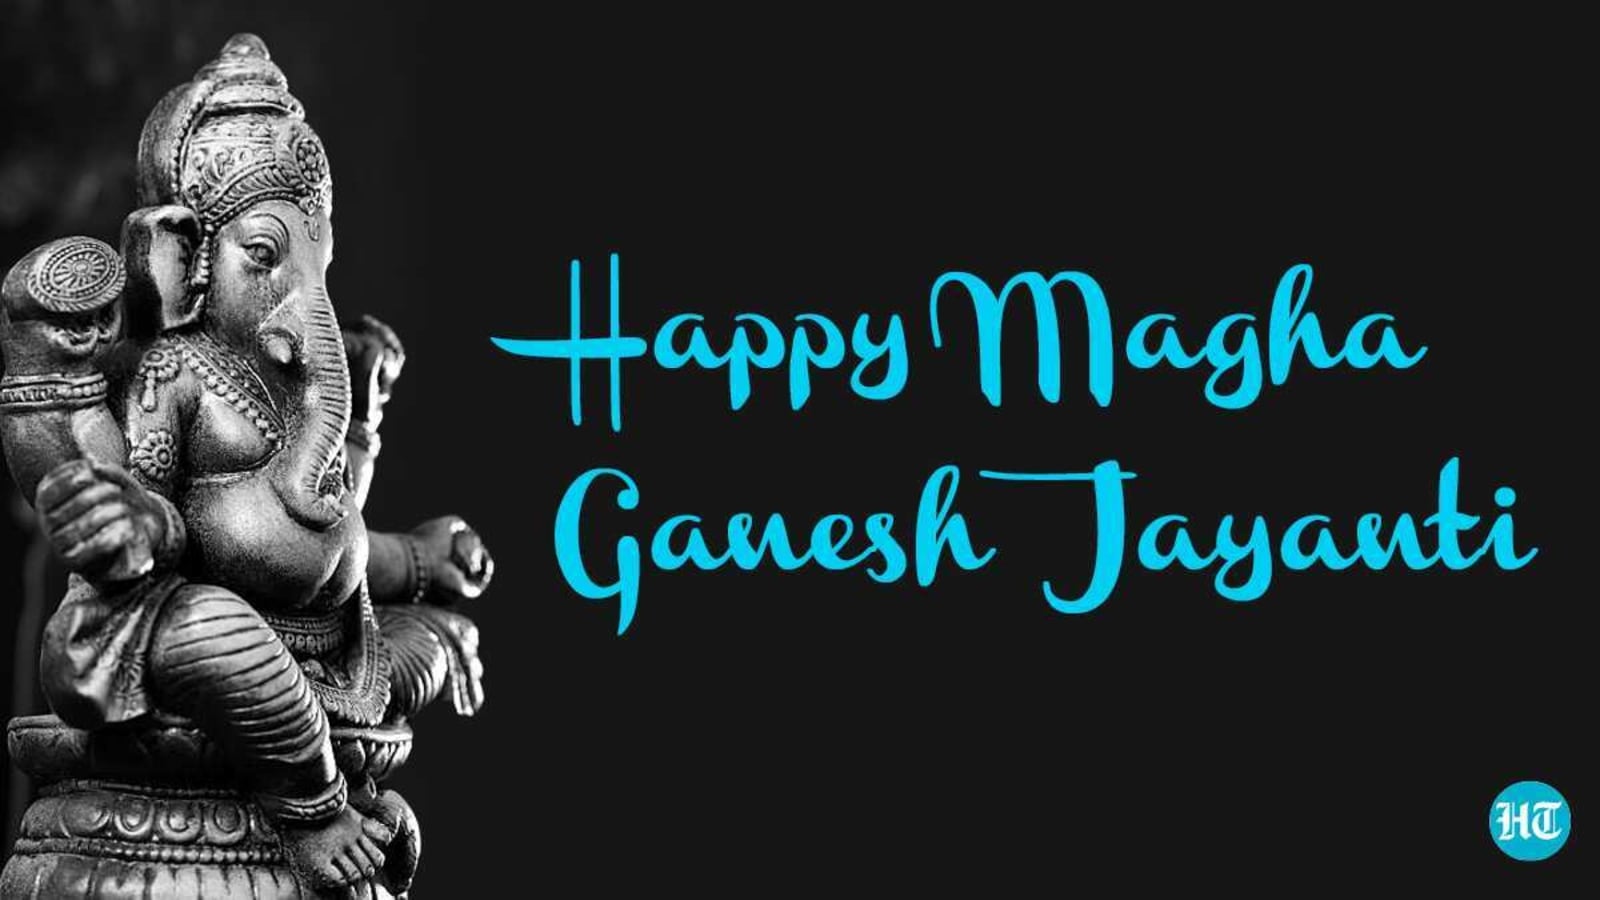 Magha Ganesh Jayanti 2021 History, significance and all you need to